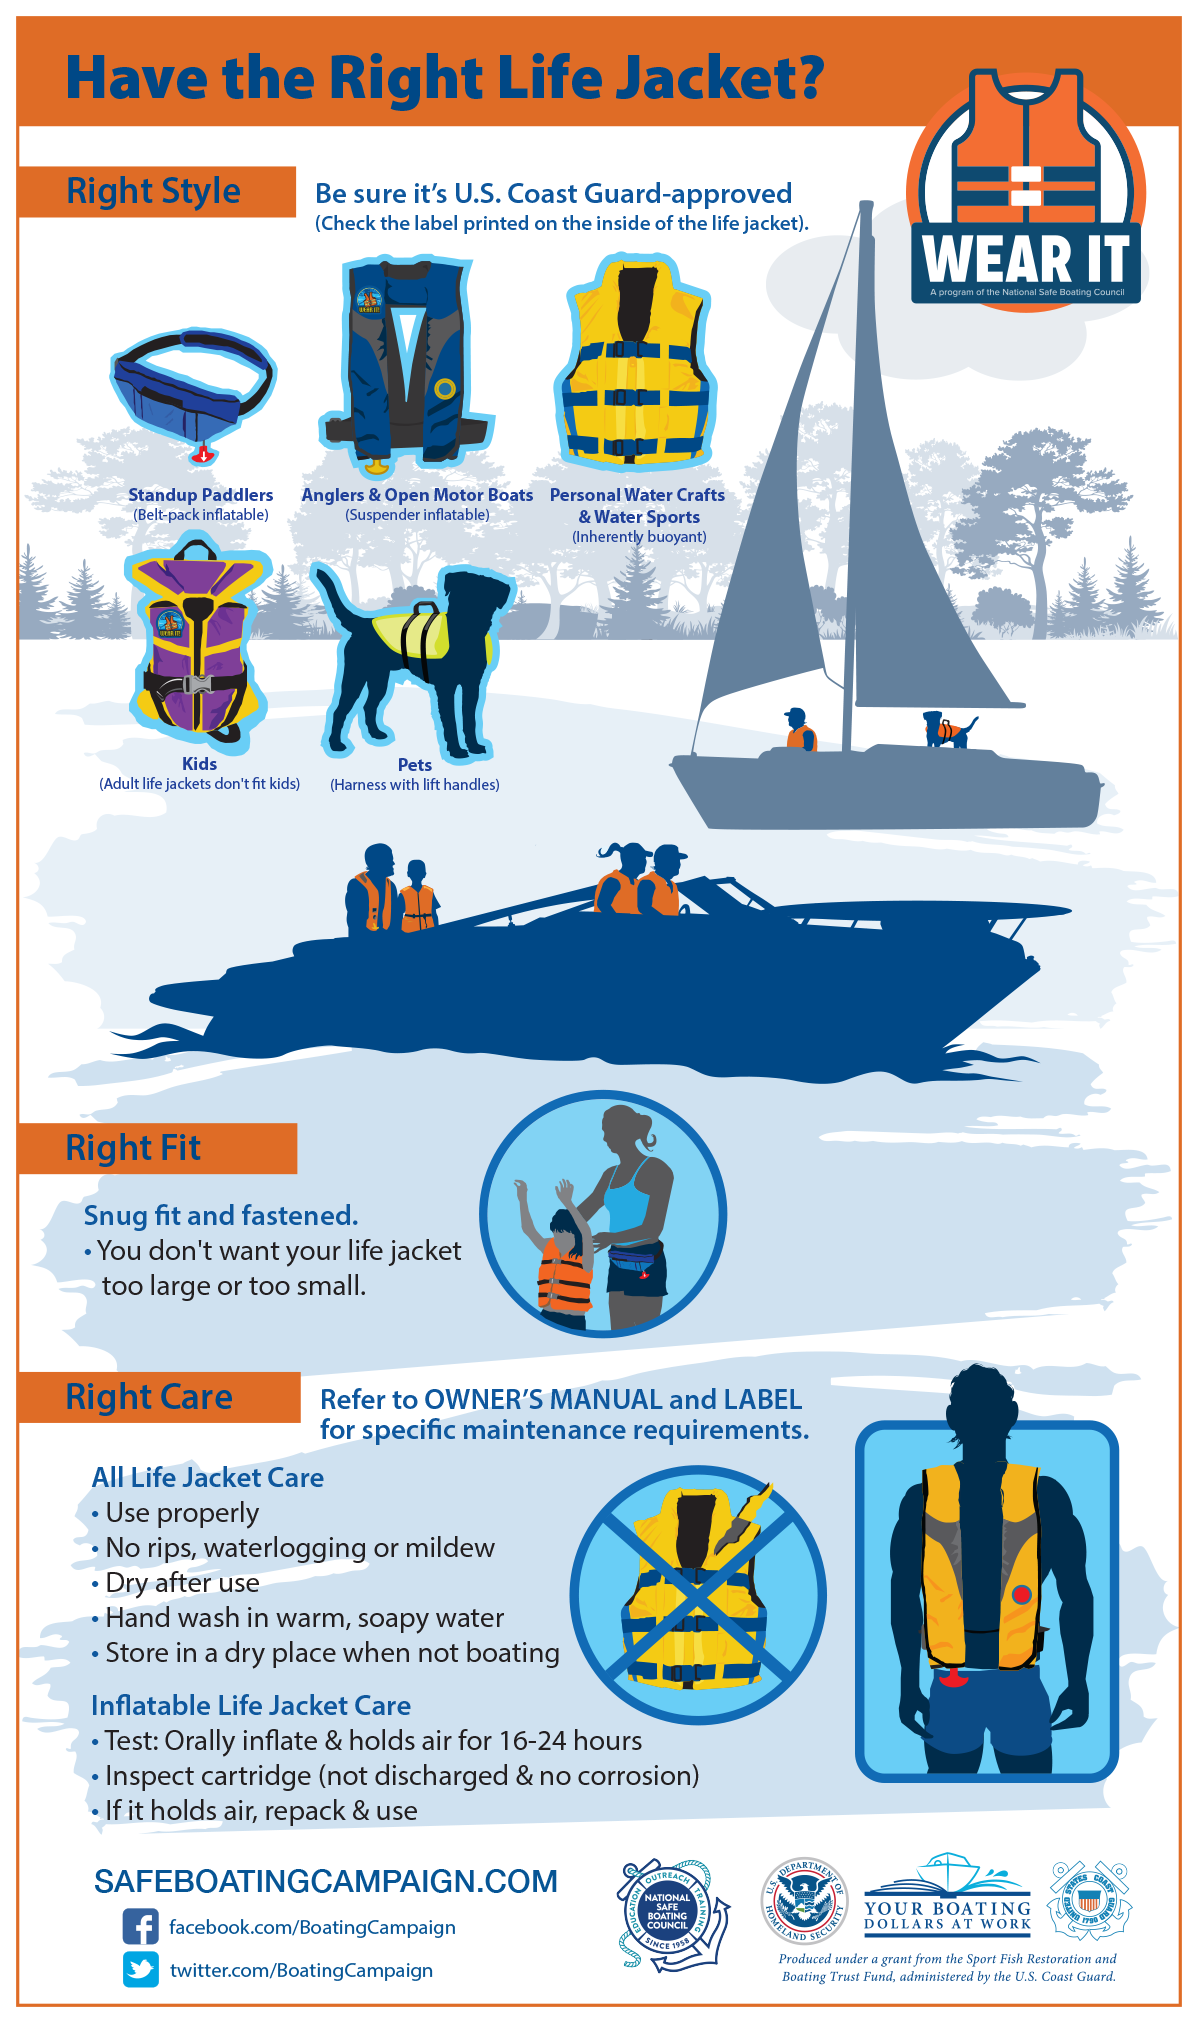 Which Life Jacket Do You Need?